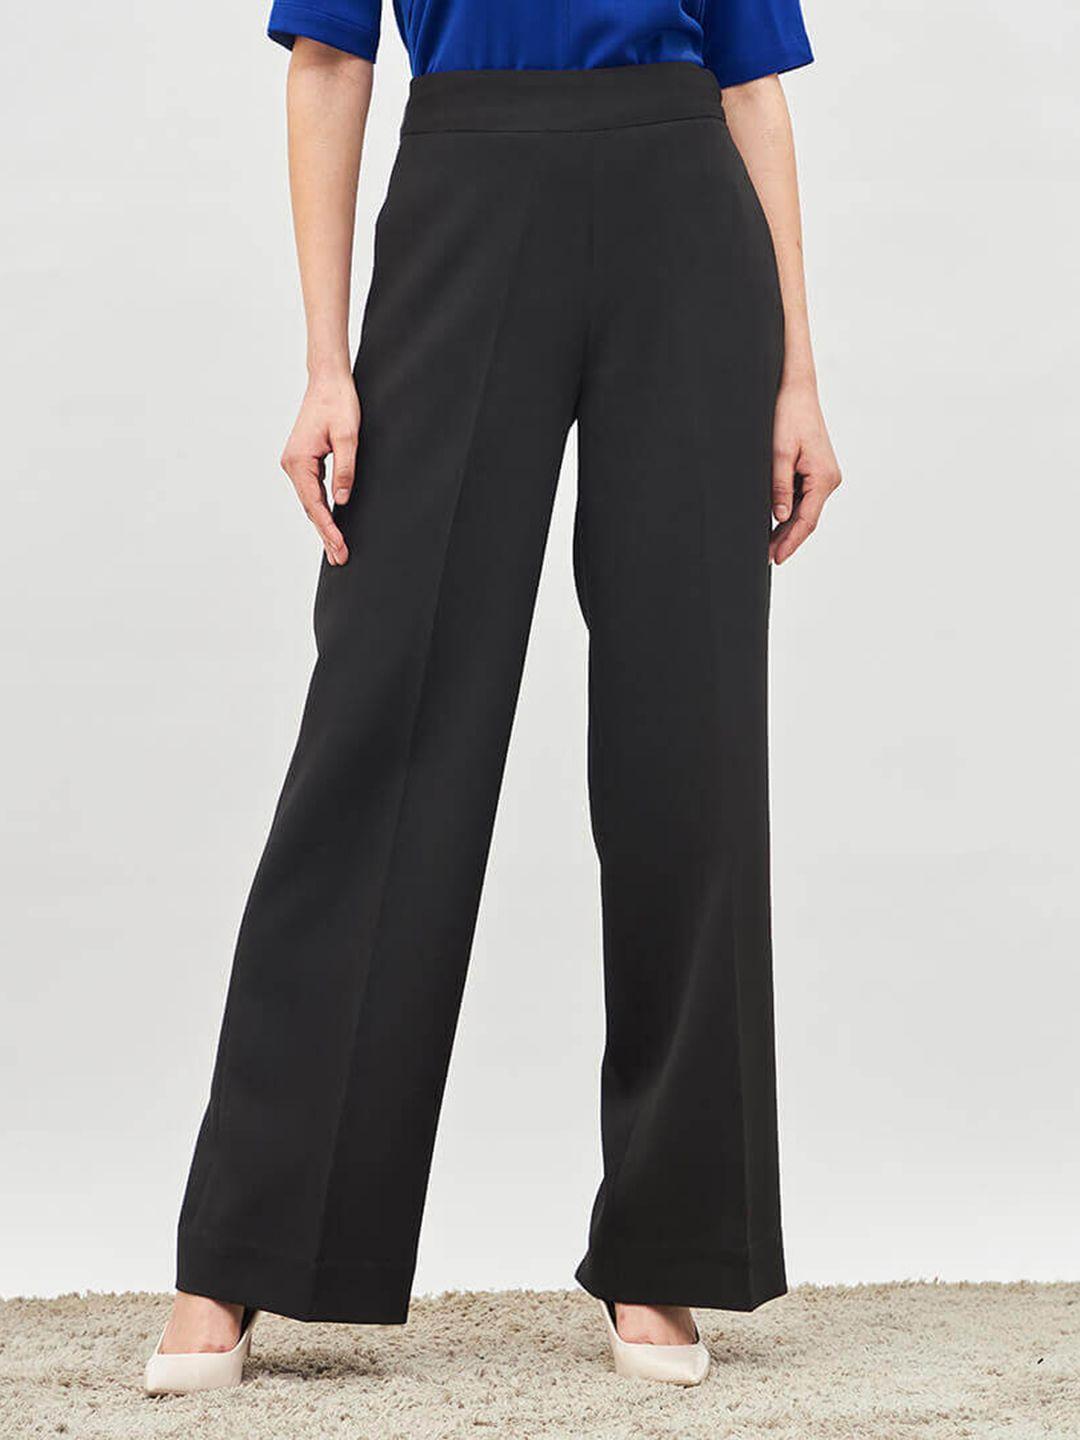 salt attire women high-rise flared wrinkle free parallel trousers